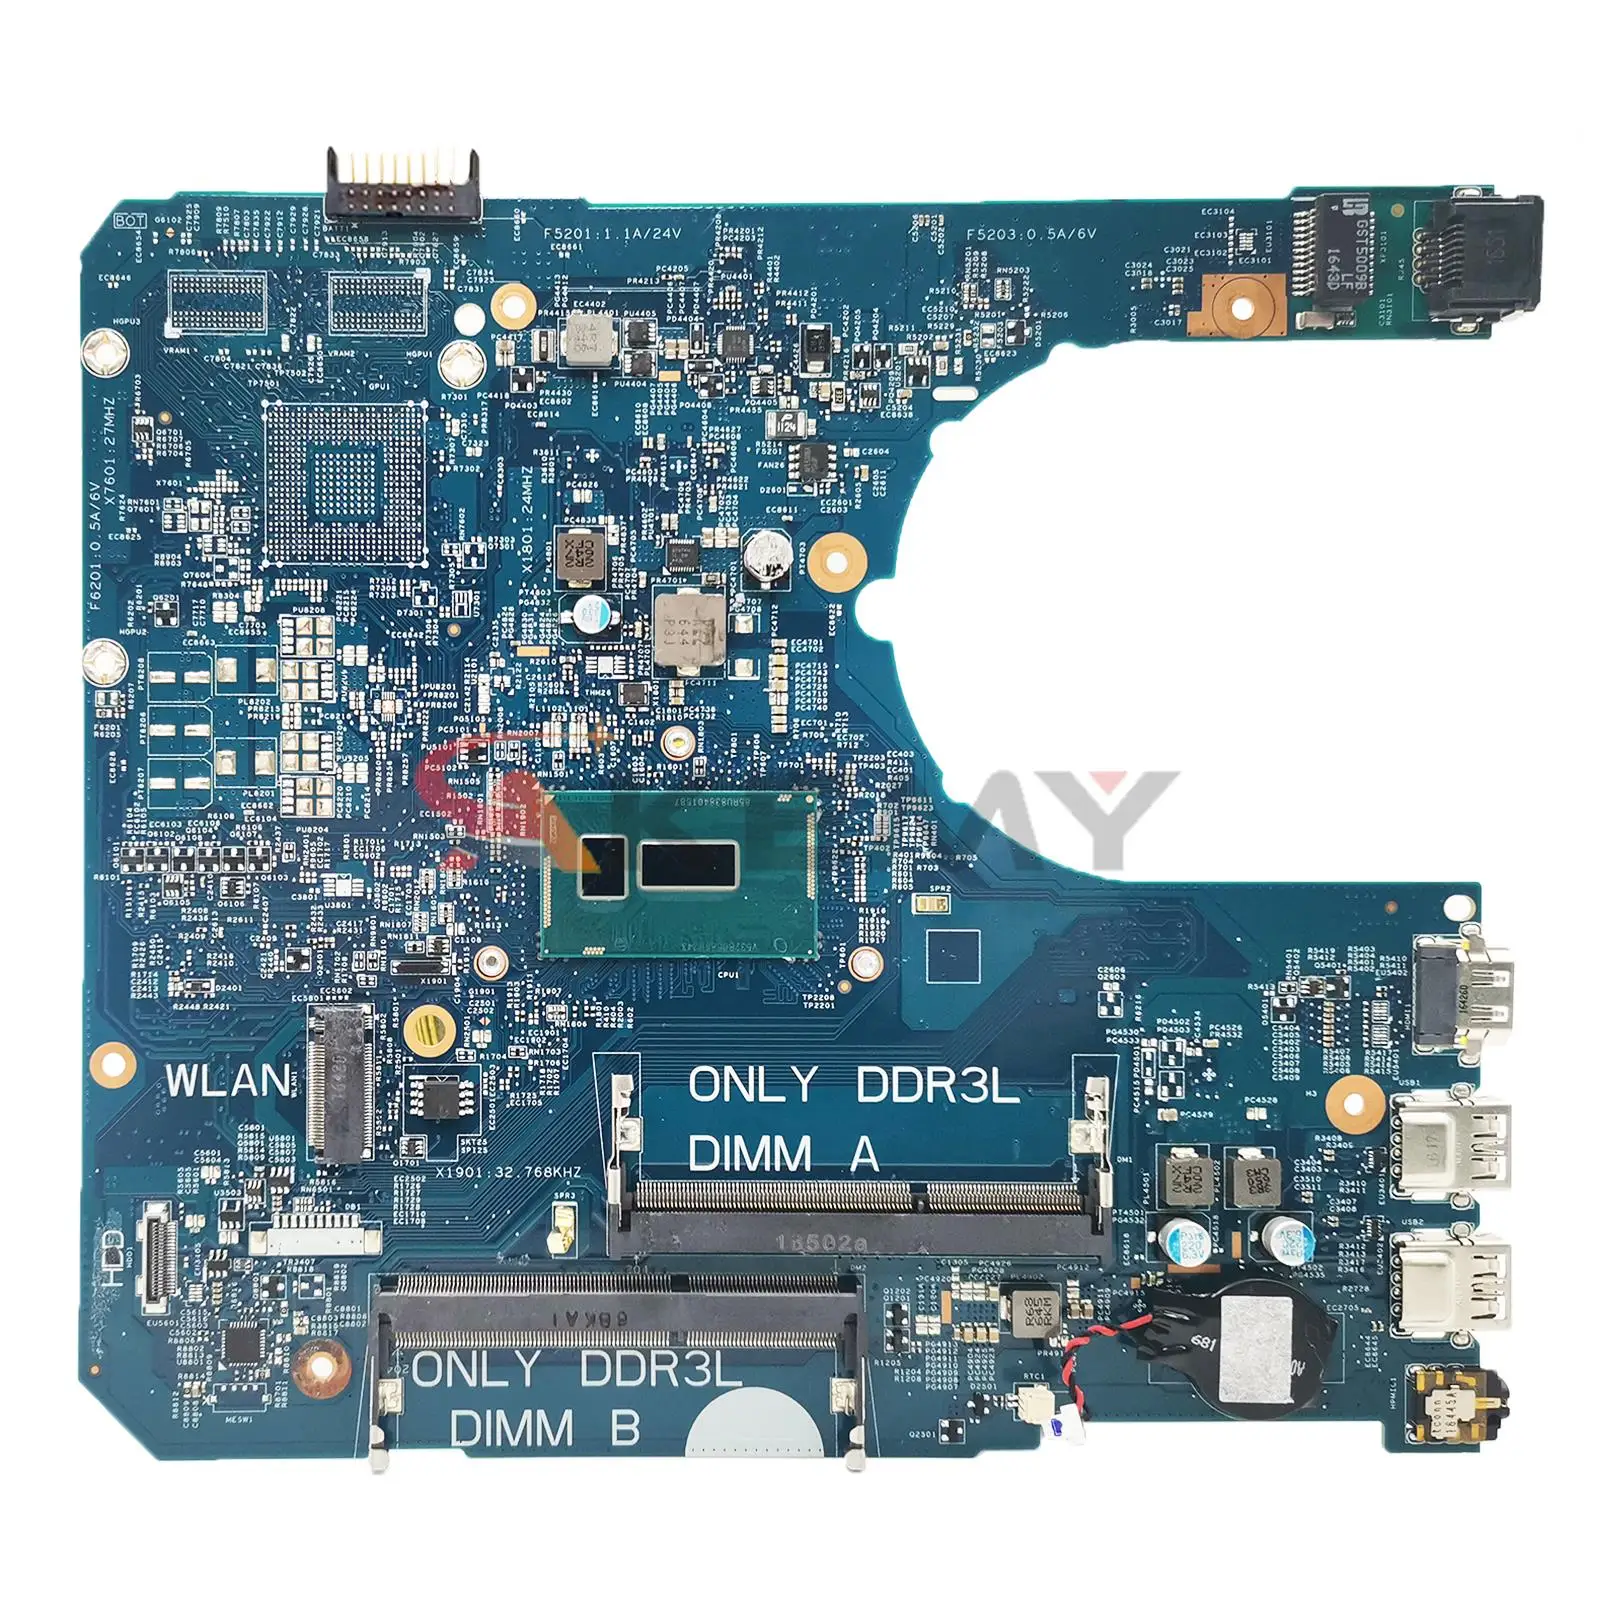 

CN-02F12F 0P9H40 0D0PG7 0CXYD3 For Dell Latitude 3460 3560 Laptop Motherboard 14290-2 PWB:85GK8 With 3215U 3825U I3 I5 CPU DDR3